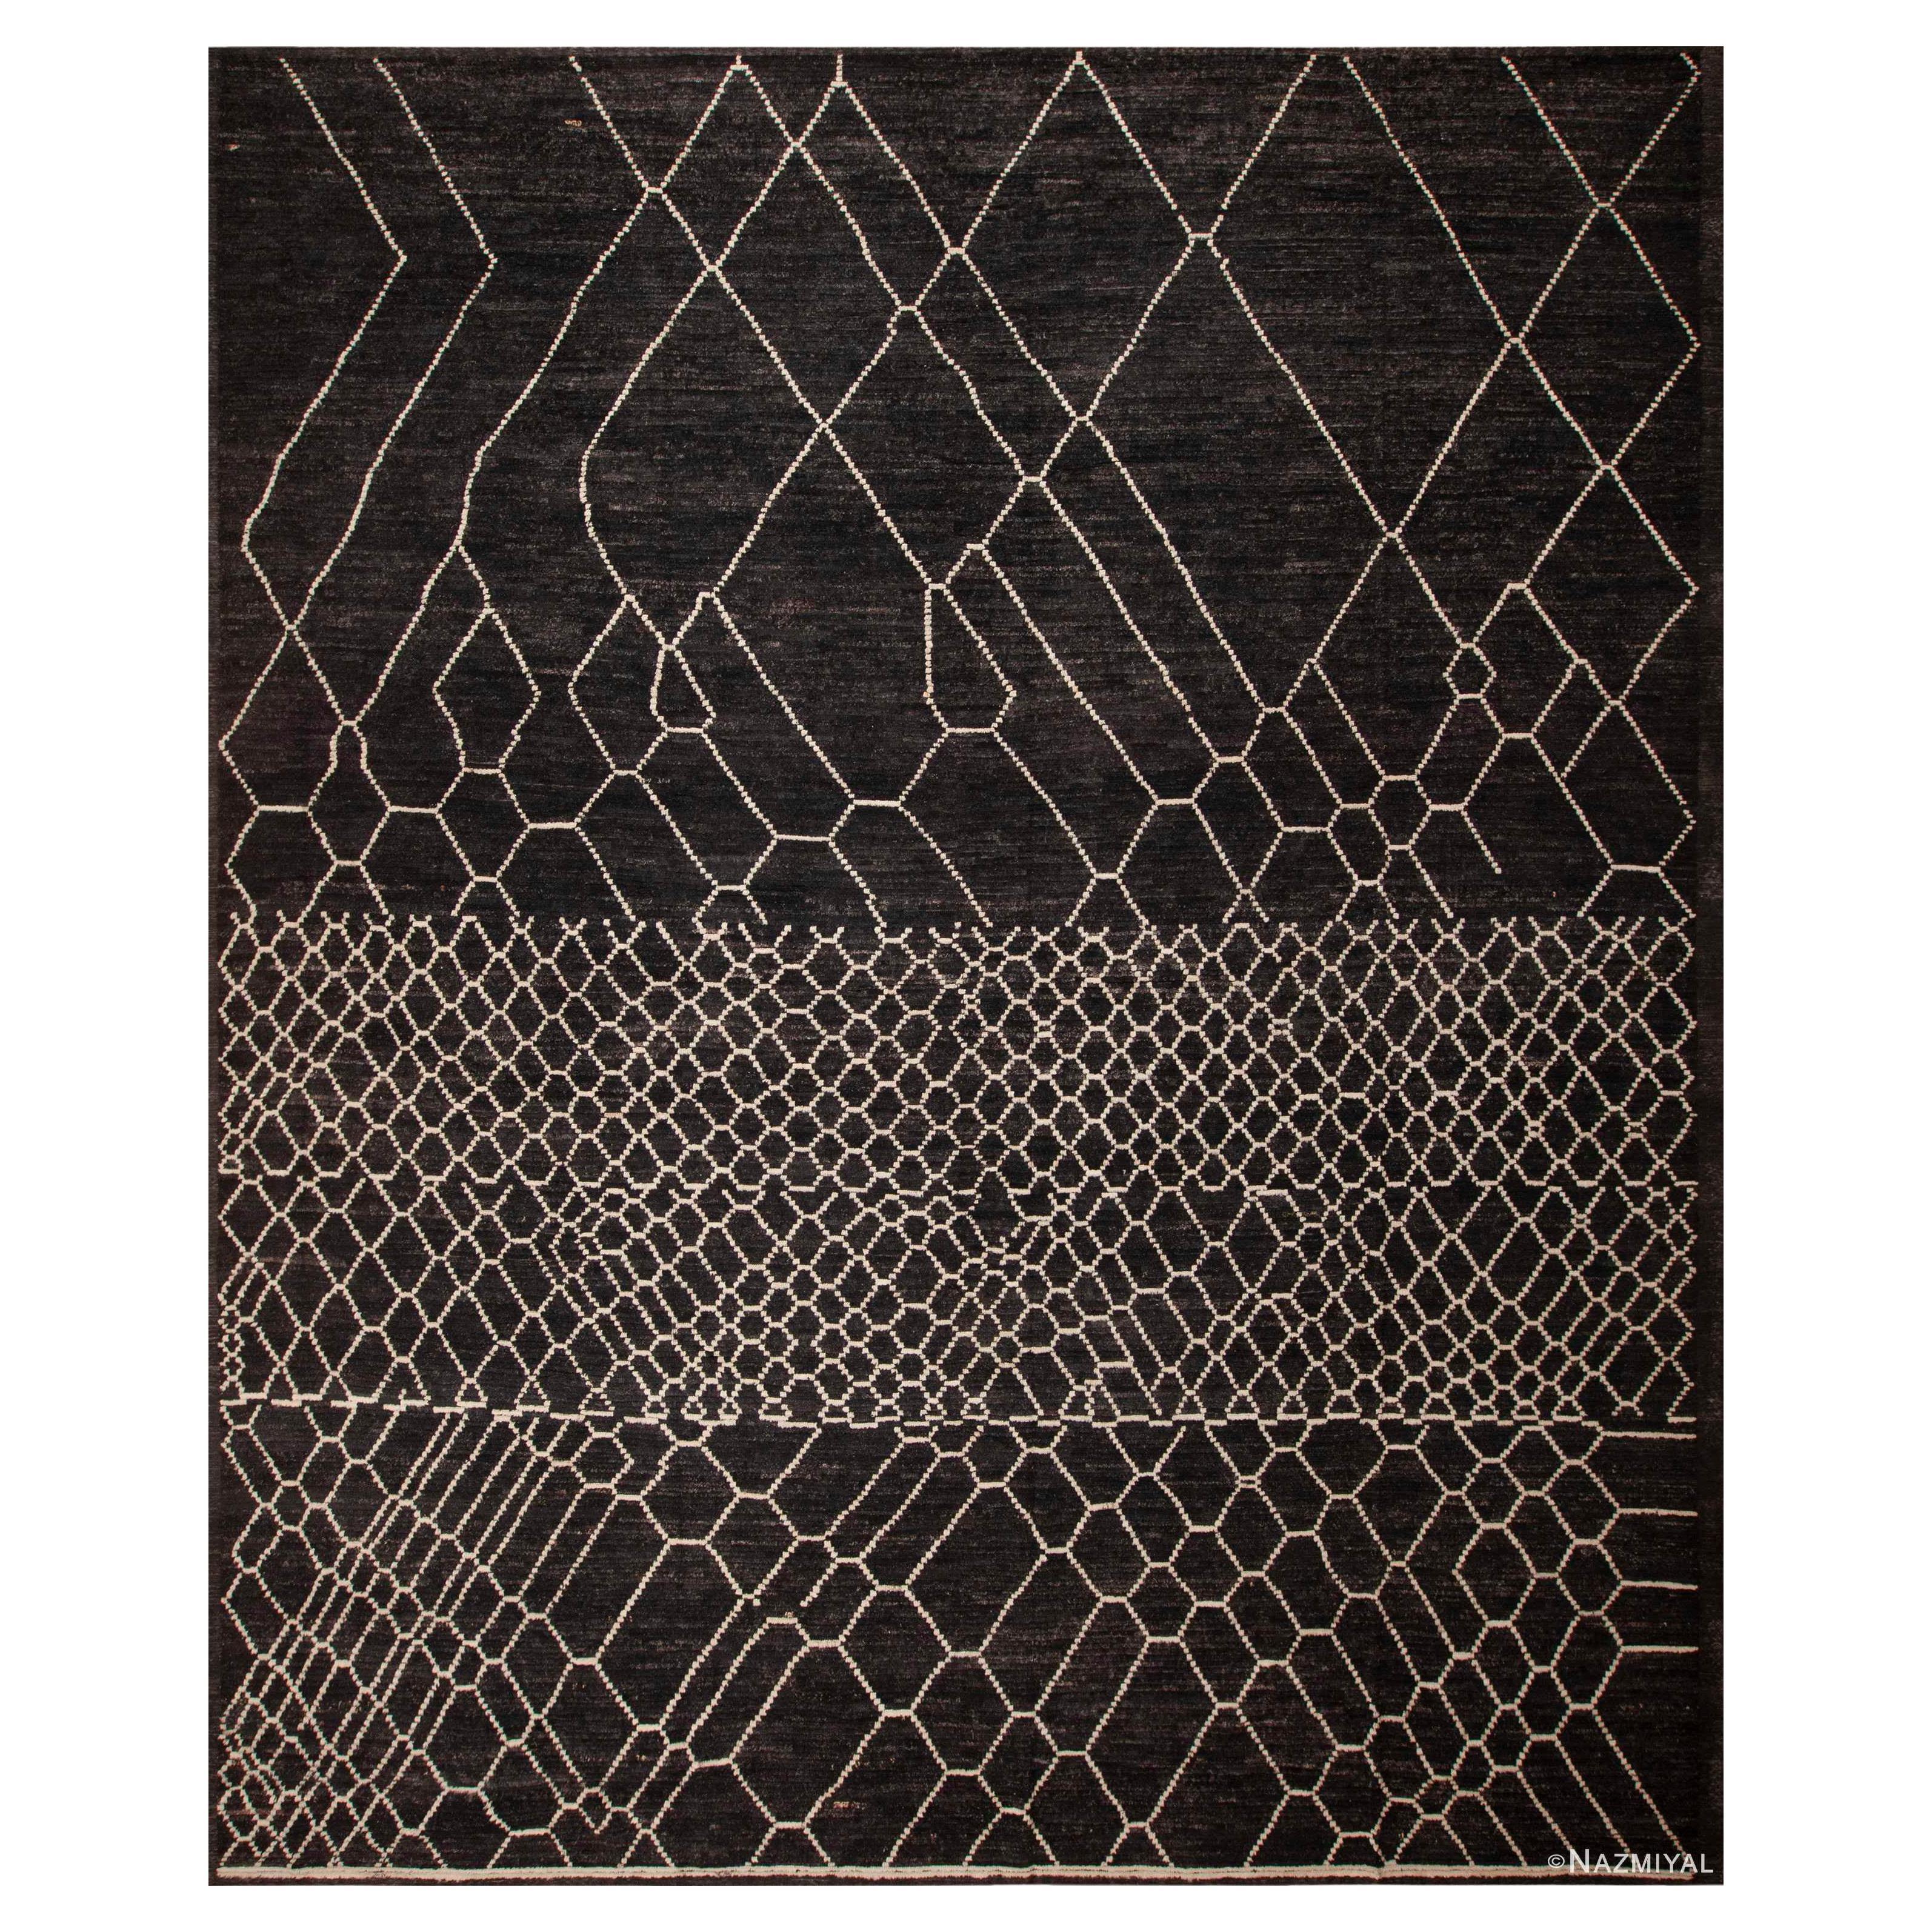 Nazmiyal Collection Black and White Tribal Berber Beni Ourain Rug 14'2" x 16'10" For Sale